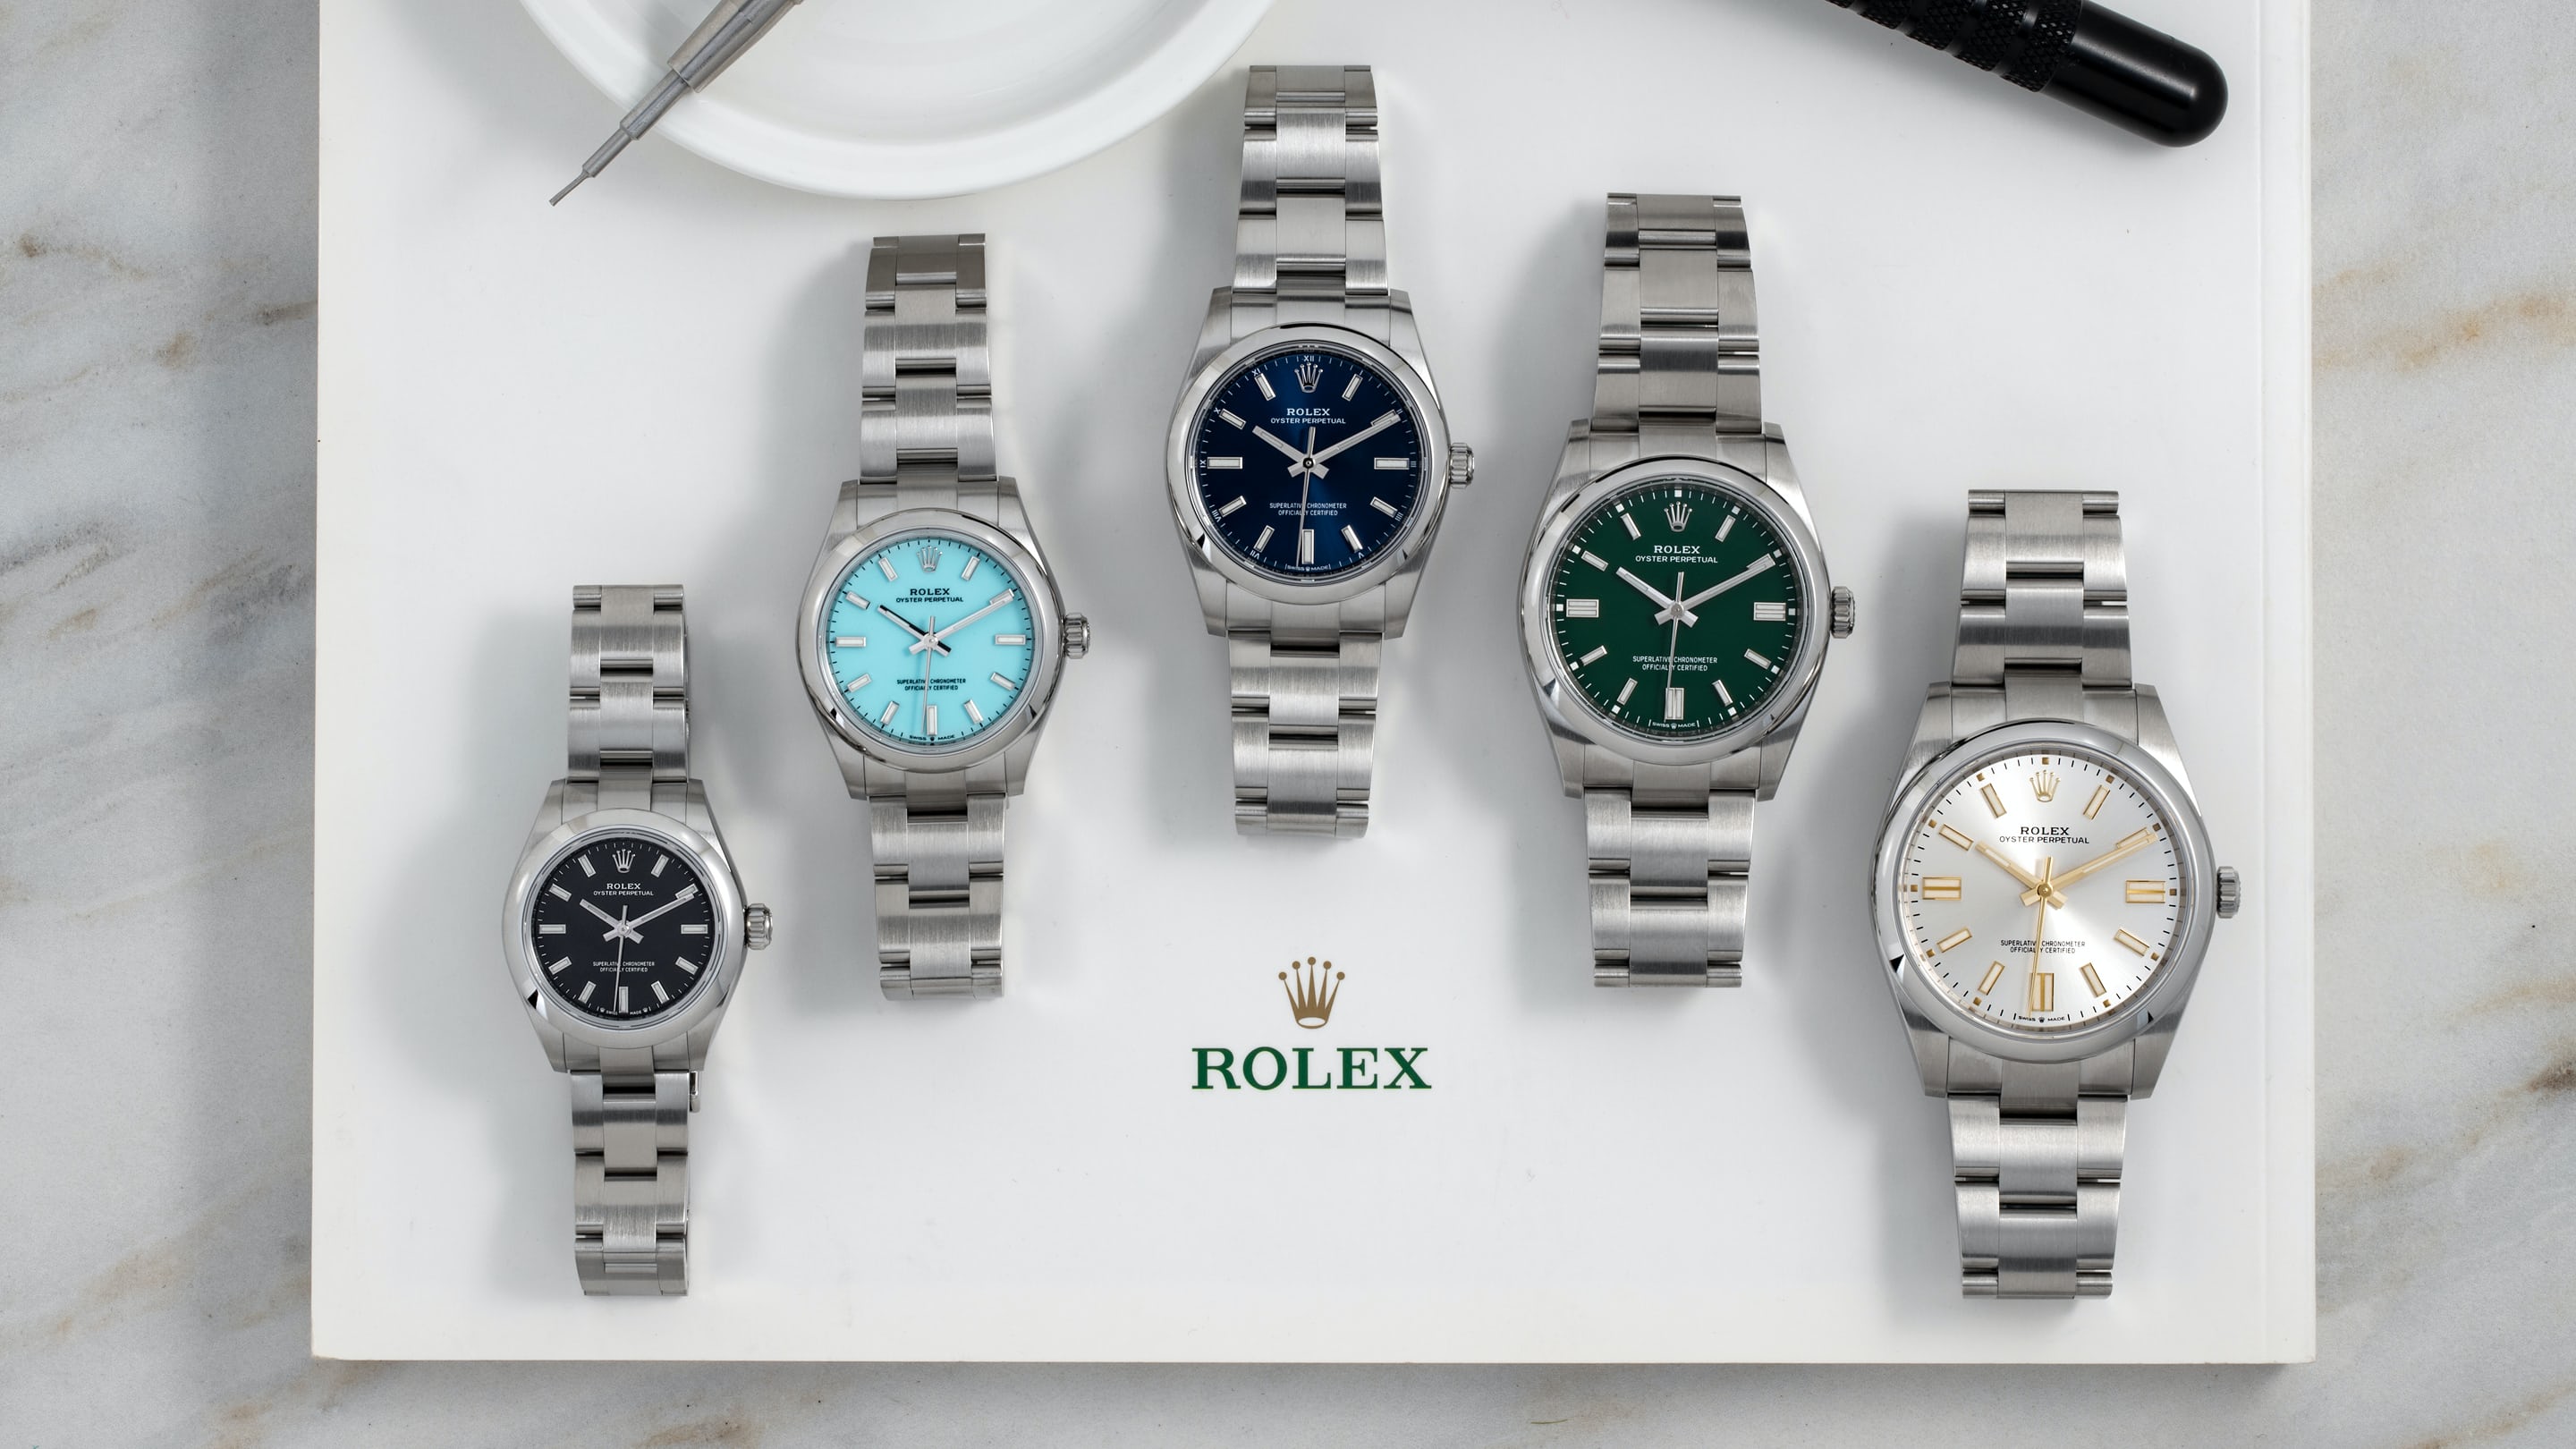 The new Rolex Oyster Perpetual in coloured dials - a analytical review -